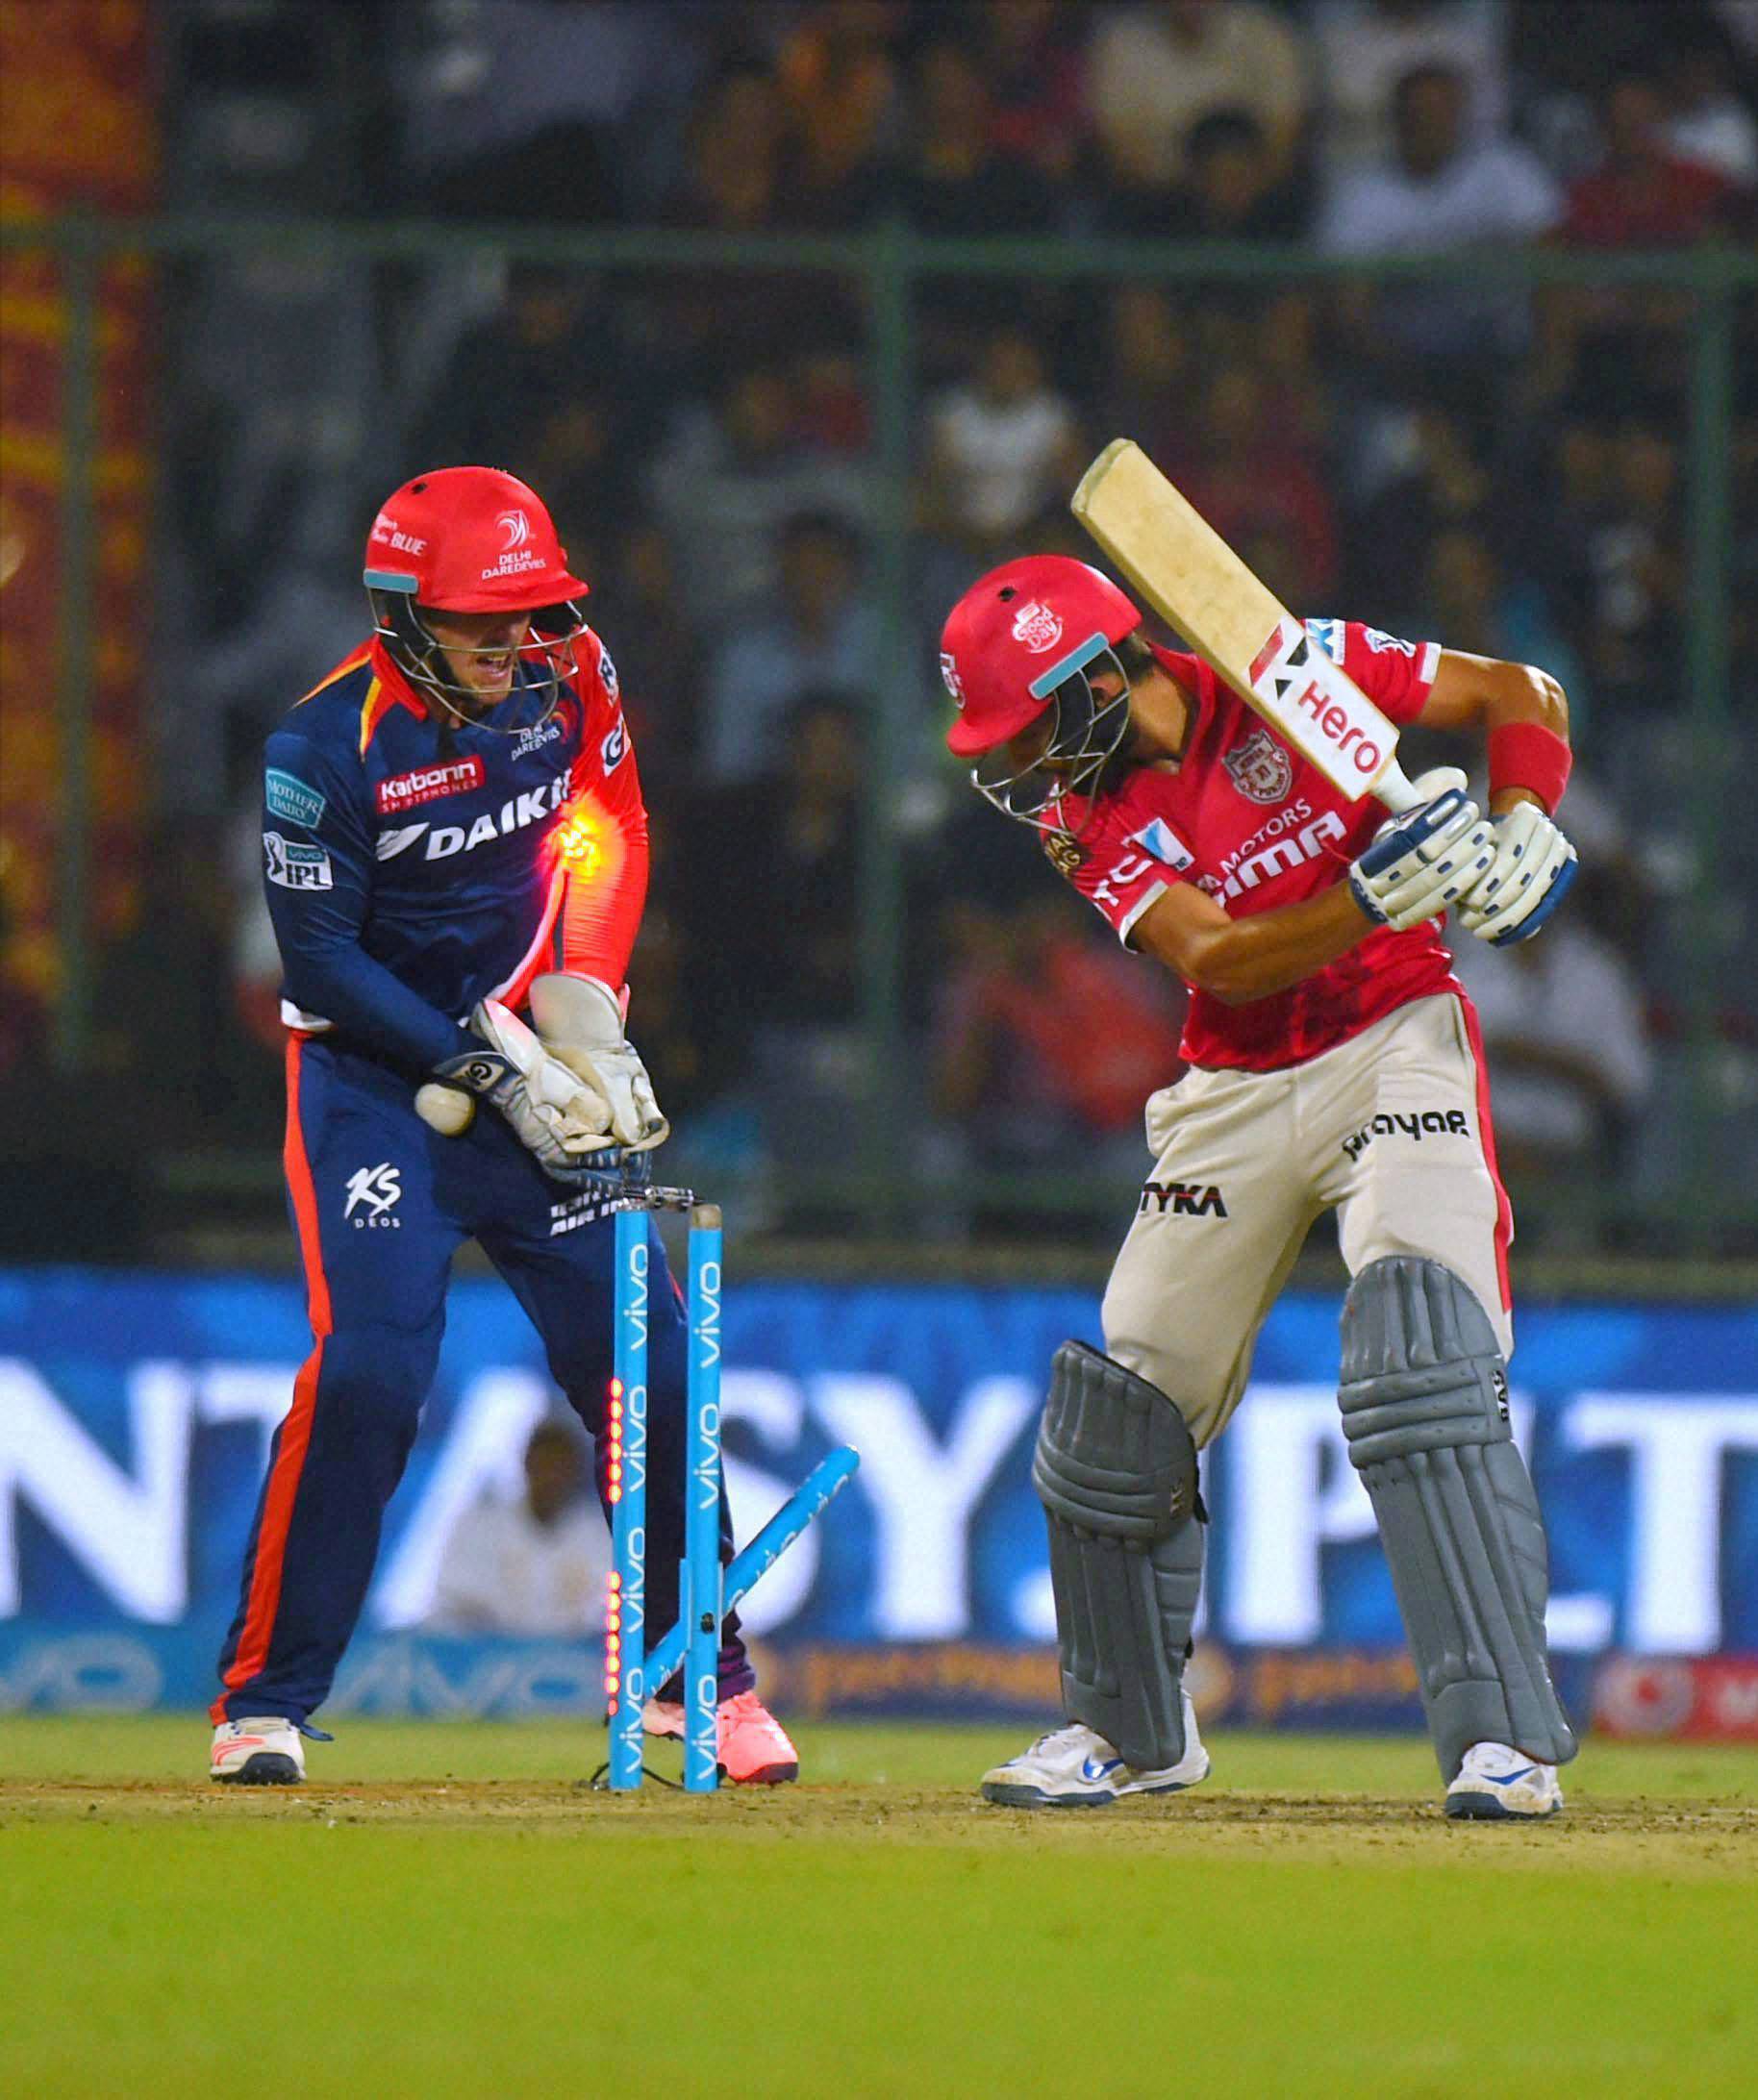 Mishra and de Kock Destroy Kings XI Punjab With Stunning Eight-Wicket Victory